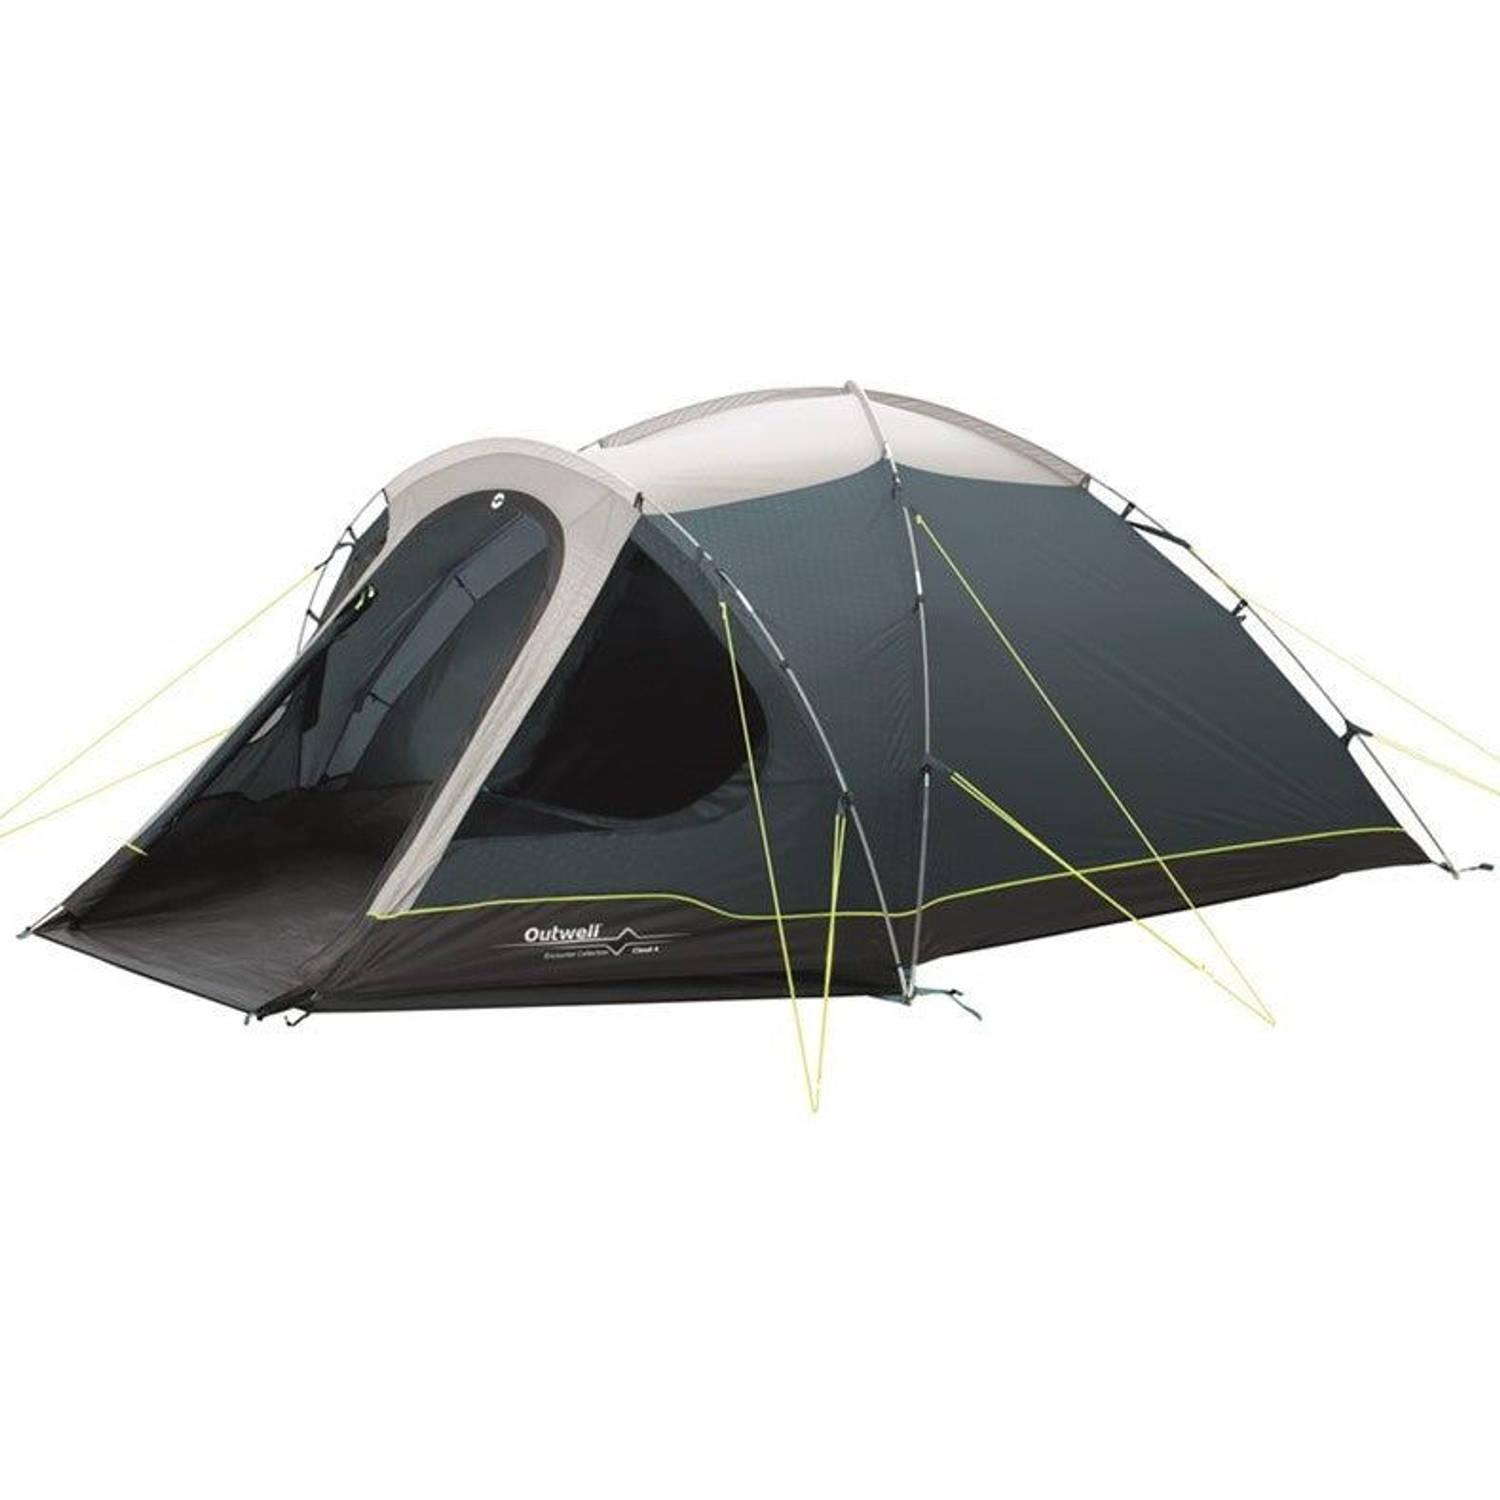 Outwell Outwell Outwell Cloud 4 tent